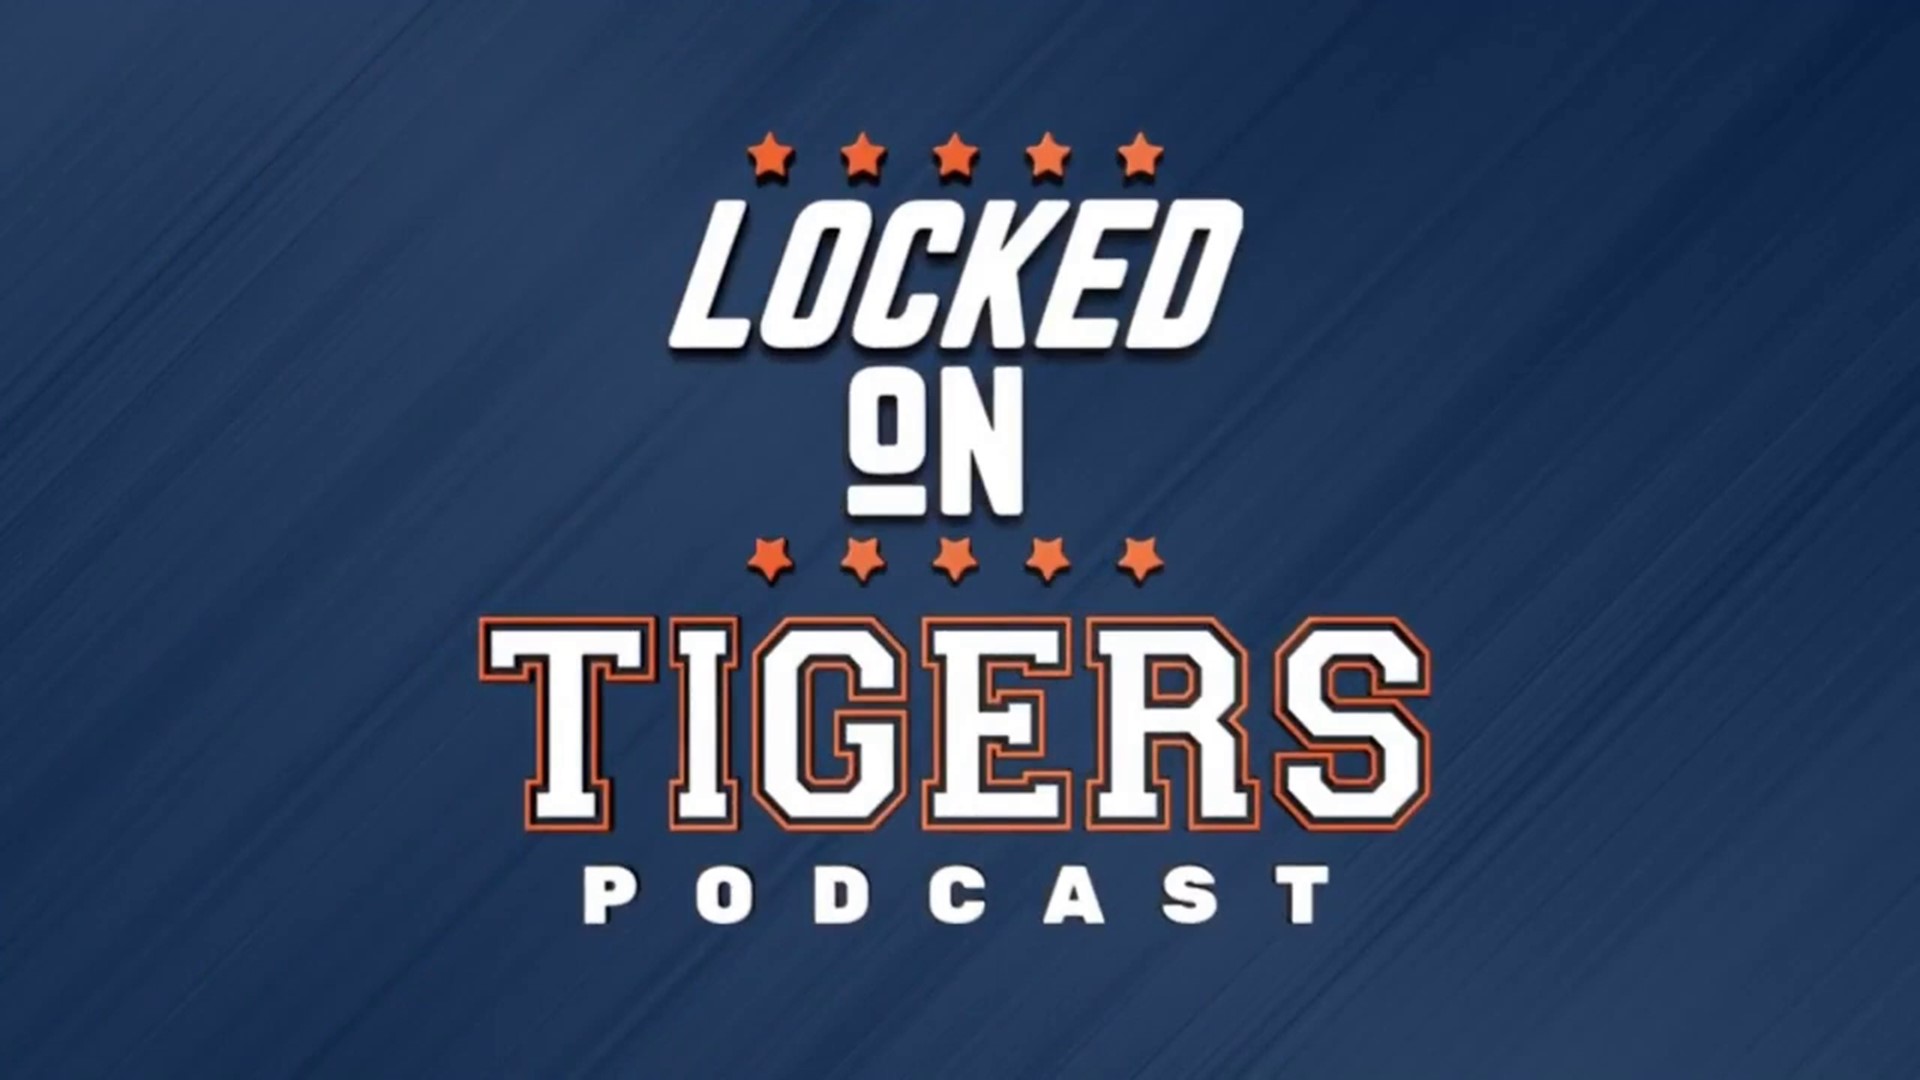 Today we discuss the Detroit Tigers 8-3 loss to the Los Angeles Dodgers on Monday night.